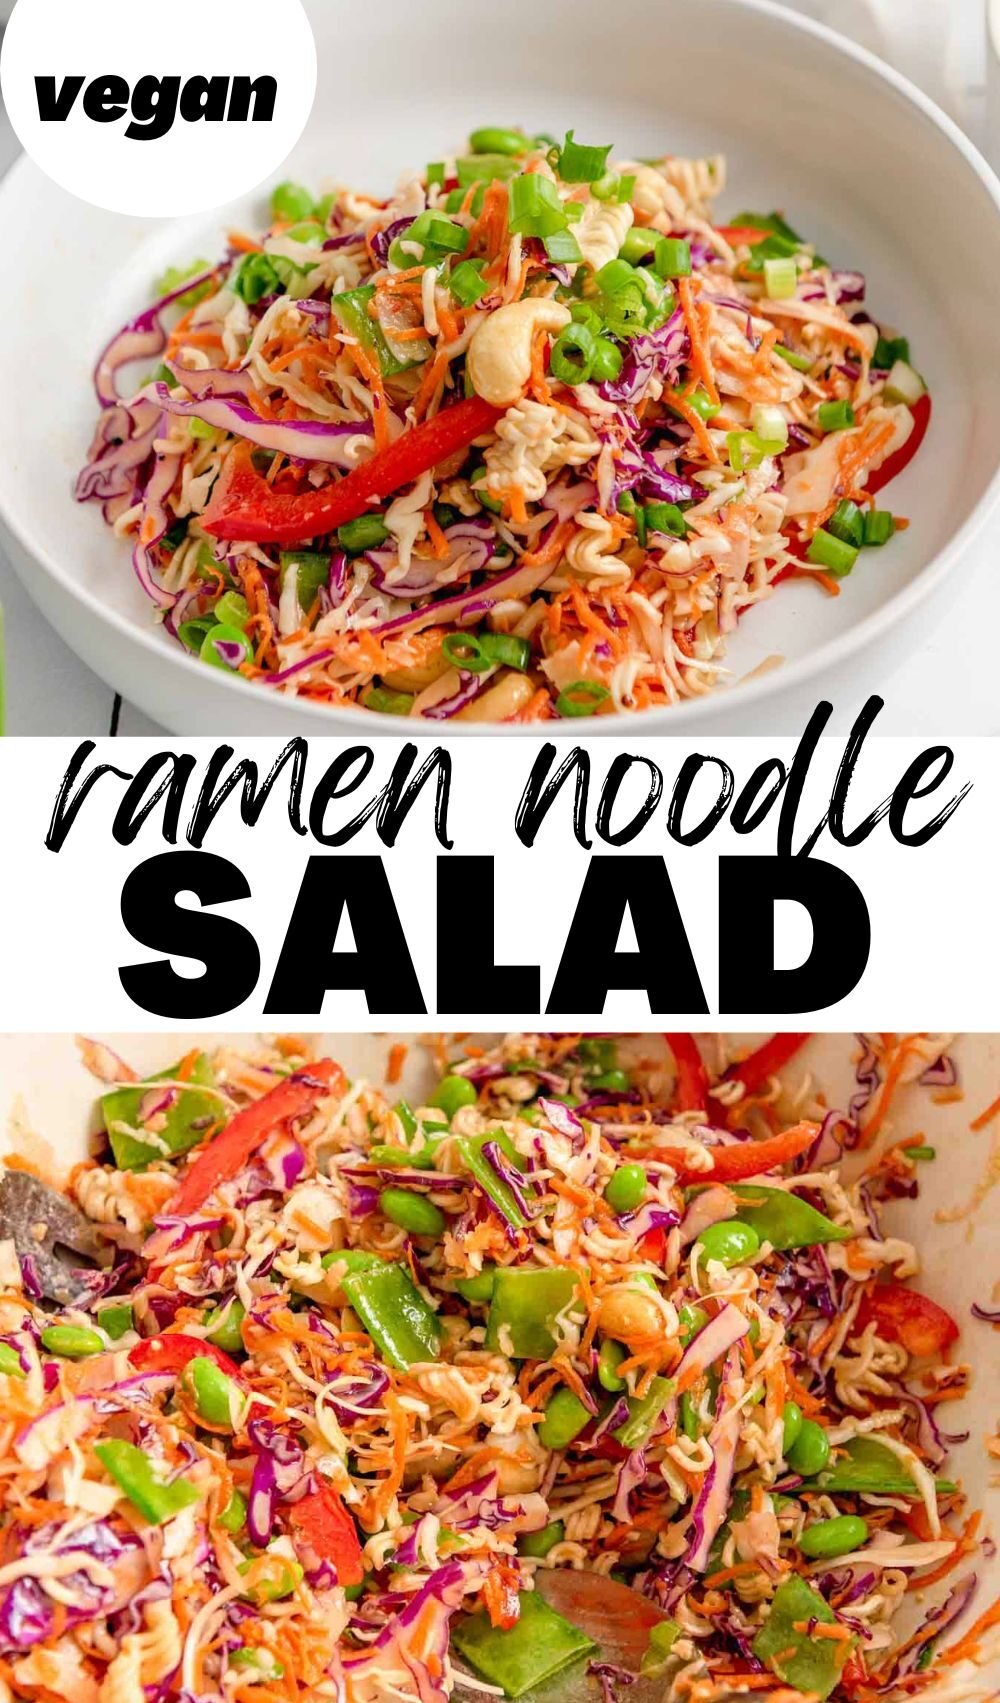 A Pinterest-style graphic with 2 images of a crunchy ramen noodle salad and stylized text overlay reading "ramen noodle salad".